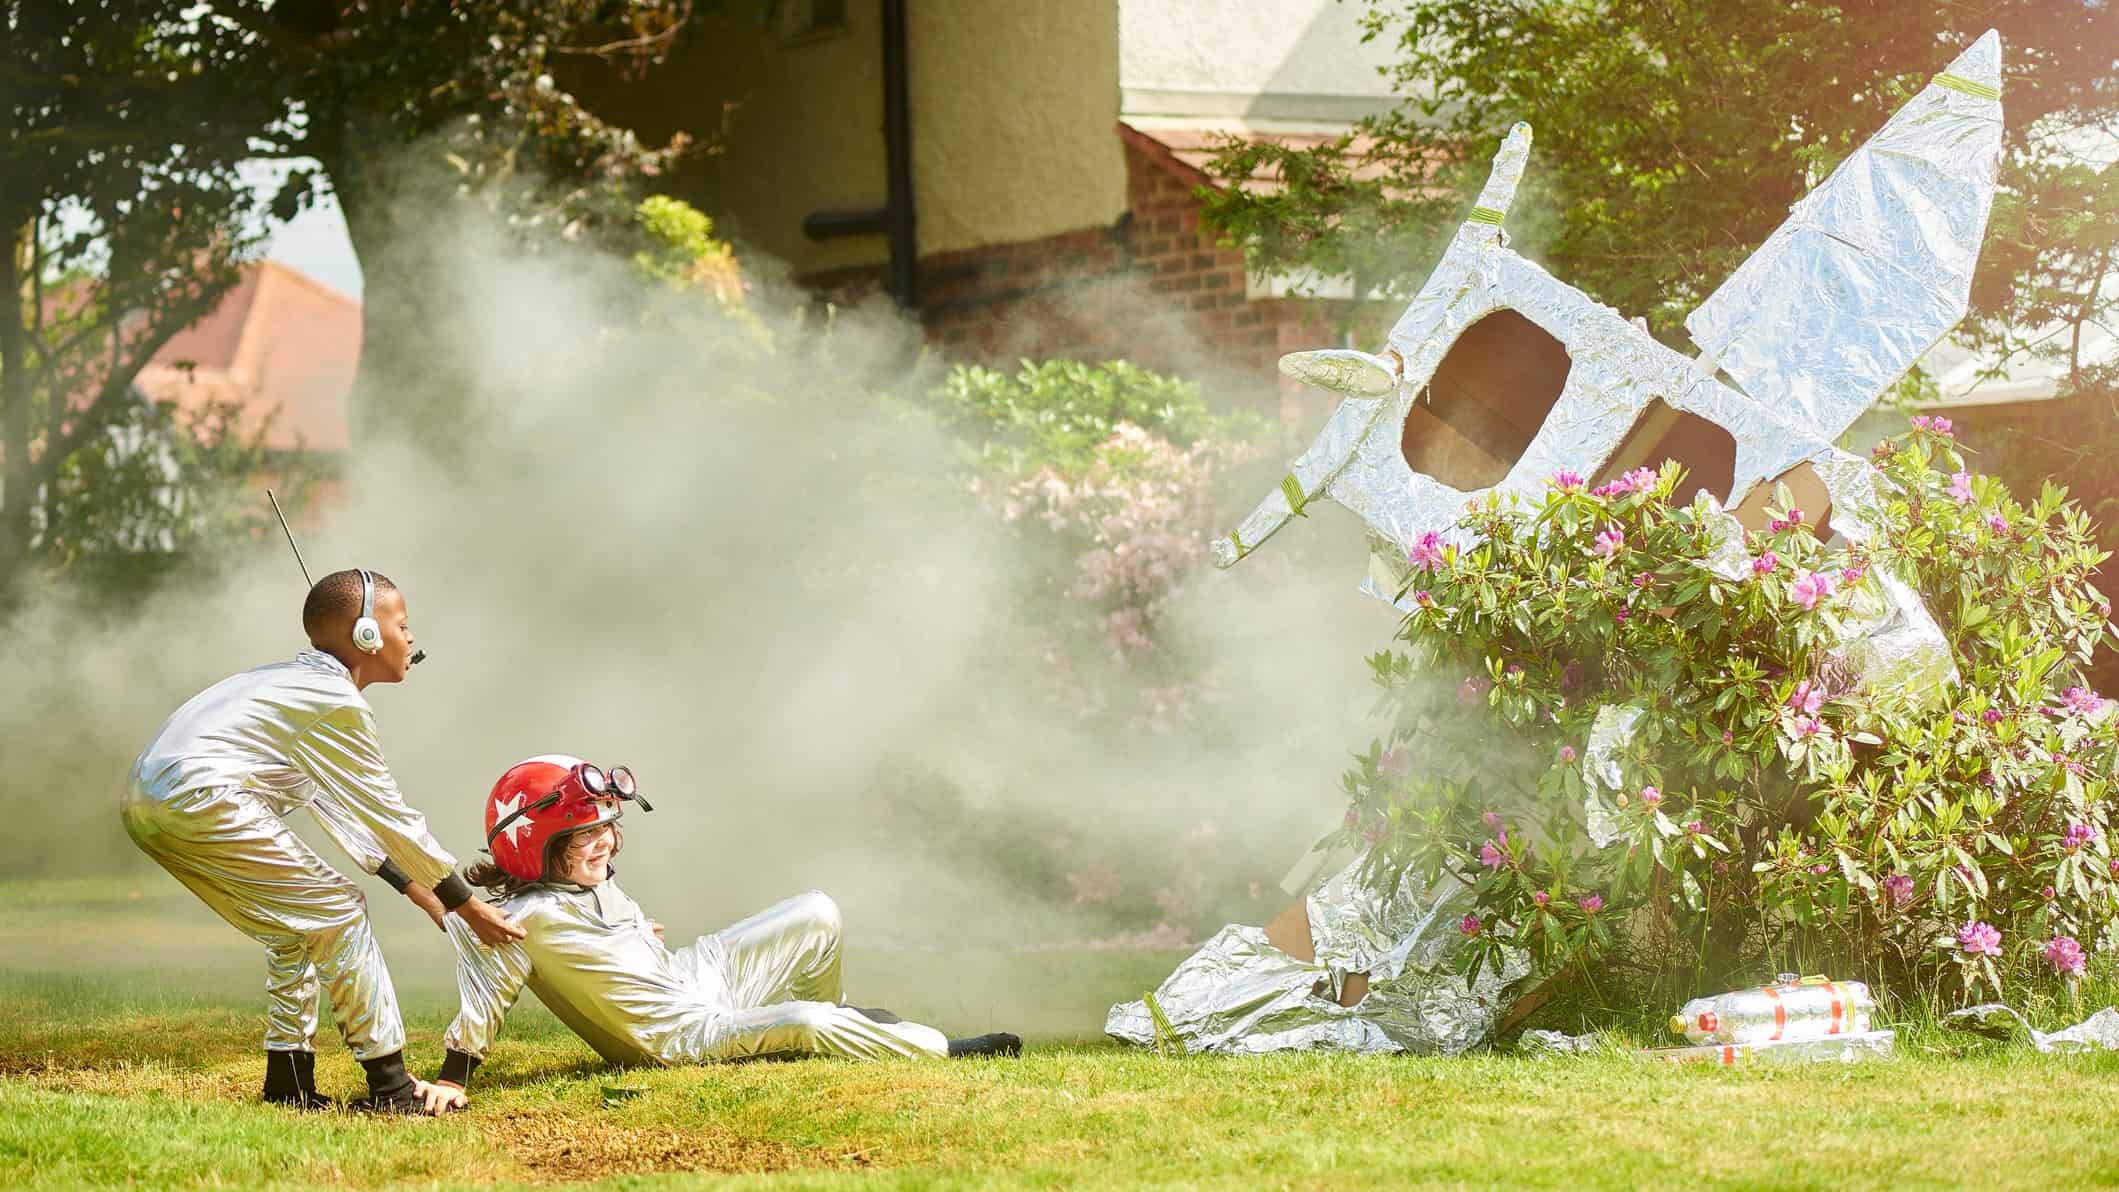 Two children dressed as spacemen in white suits look on at the smoking wreckage of their tin foil covered carboard rocket in their backyard with one child pulling the other away from the crash site.